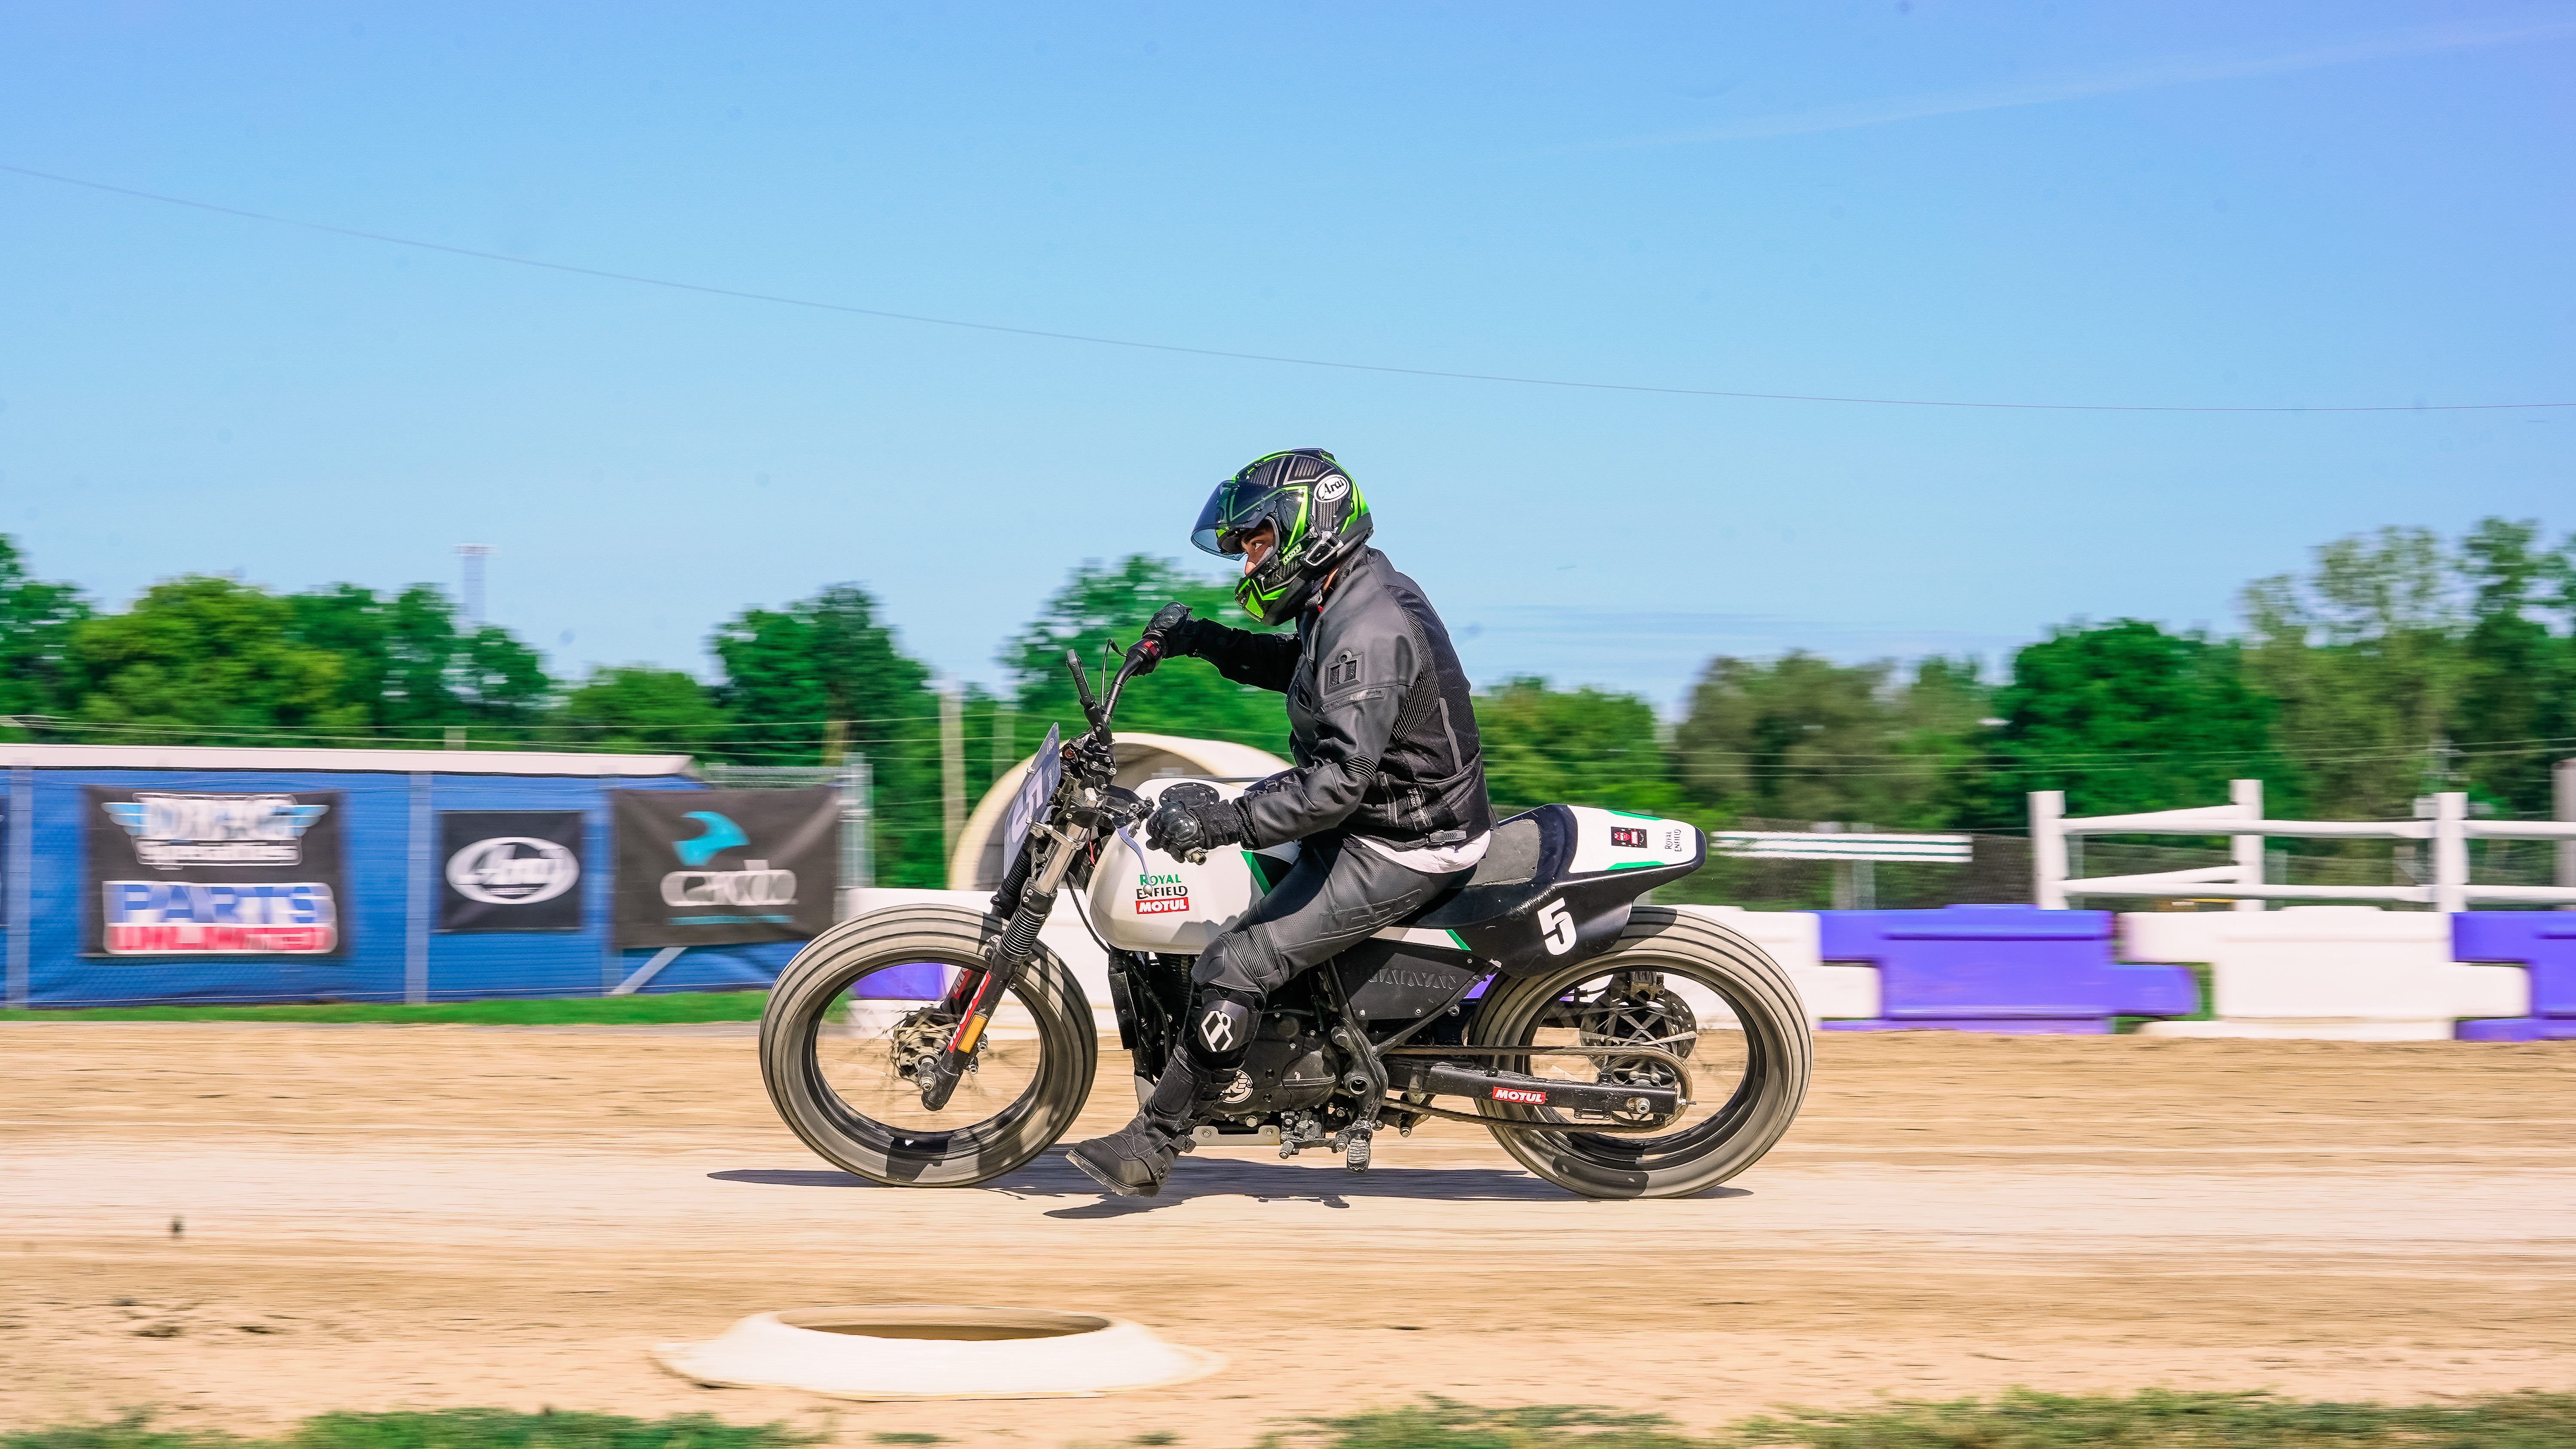 If You Think You Know How to Ride Motorcycles, Try Flat Track